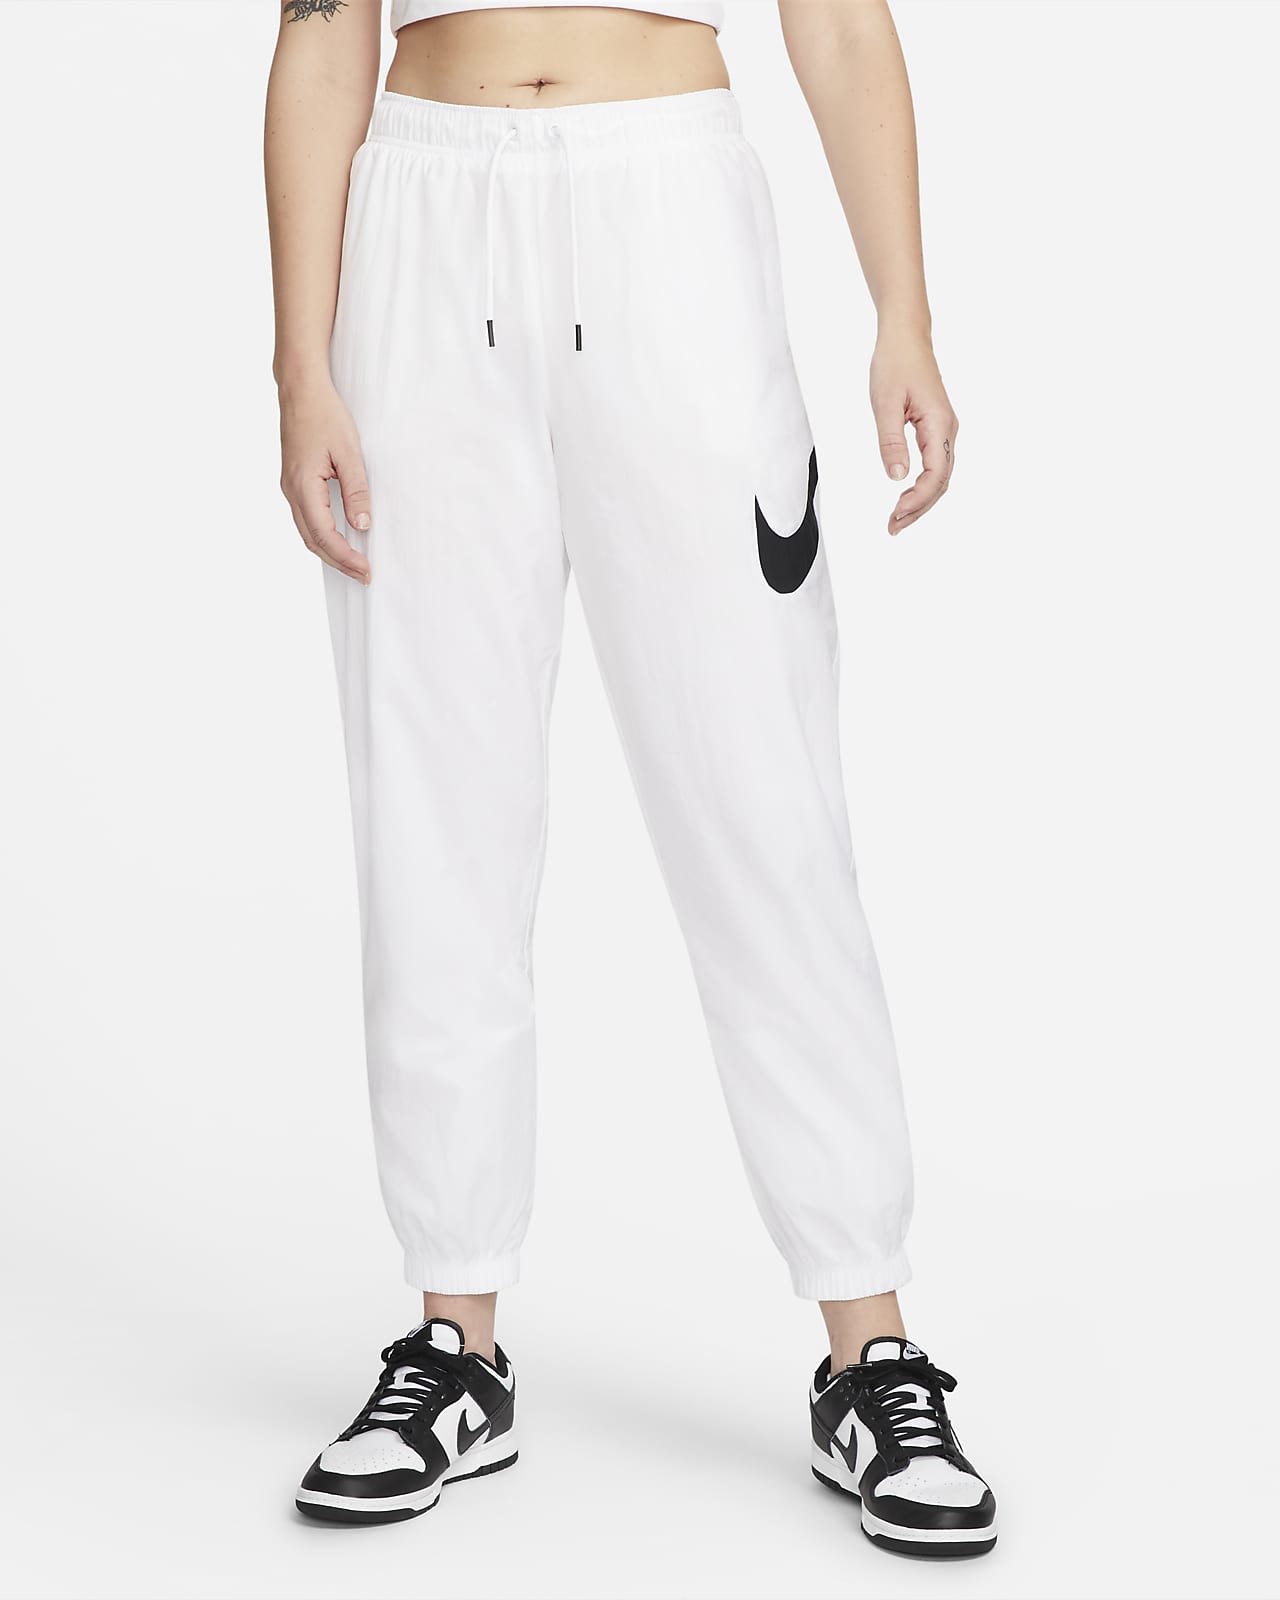 Mujer Negro Completo Pants. Nike MX